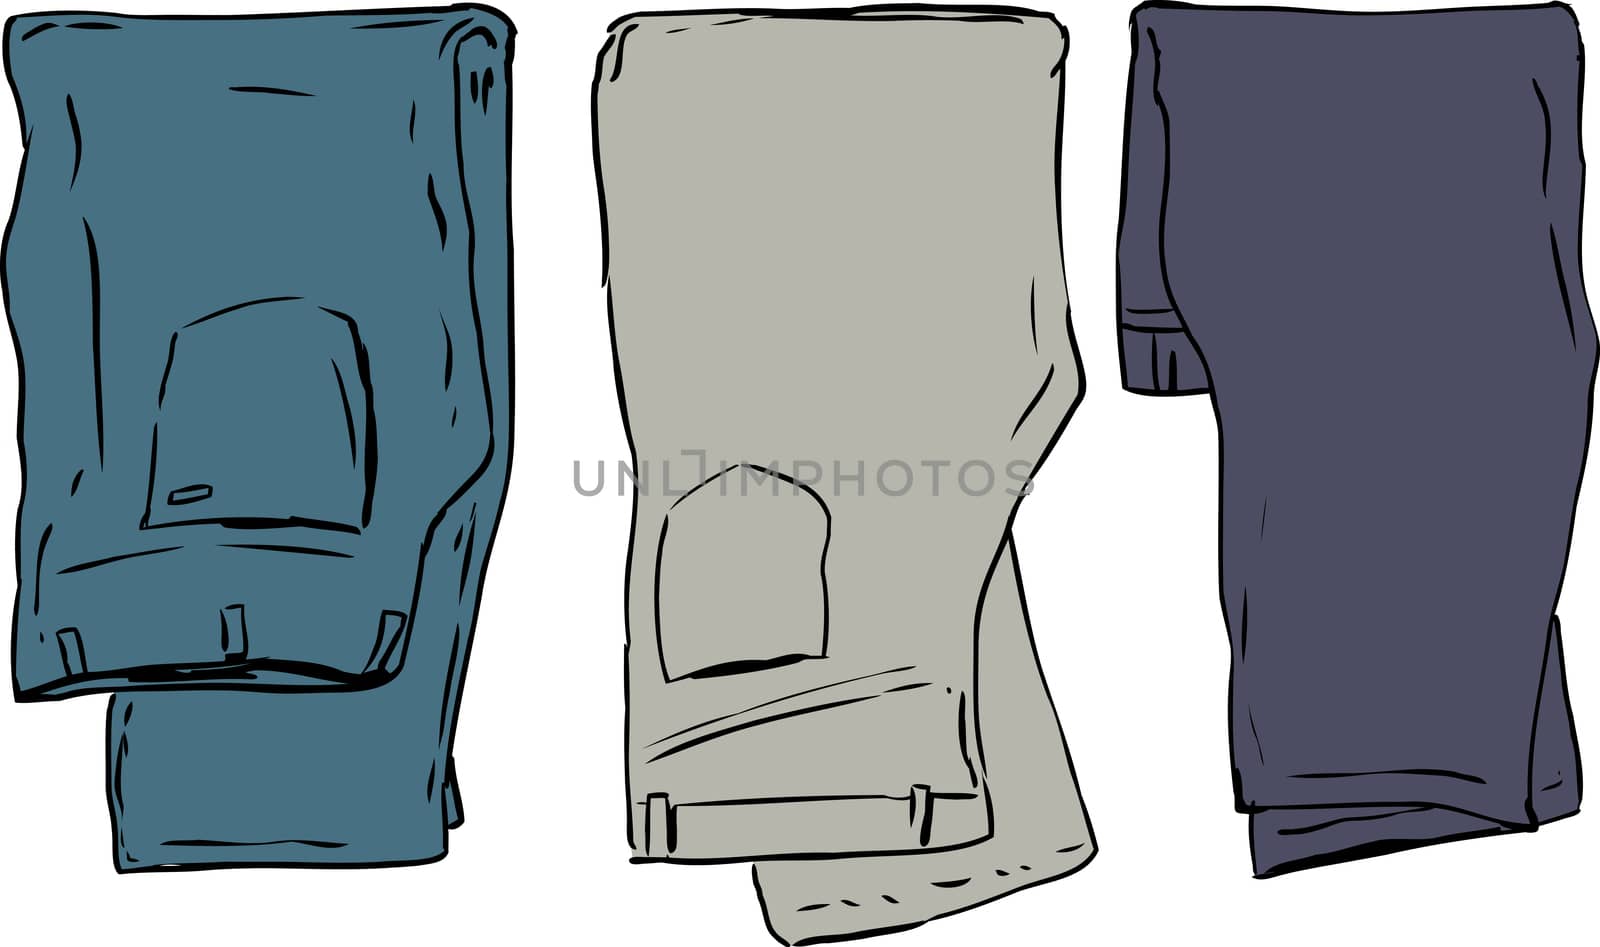 Folded Over Pants by TheBlackRhino